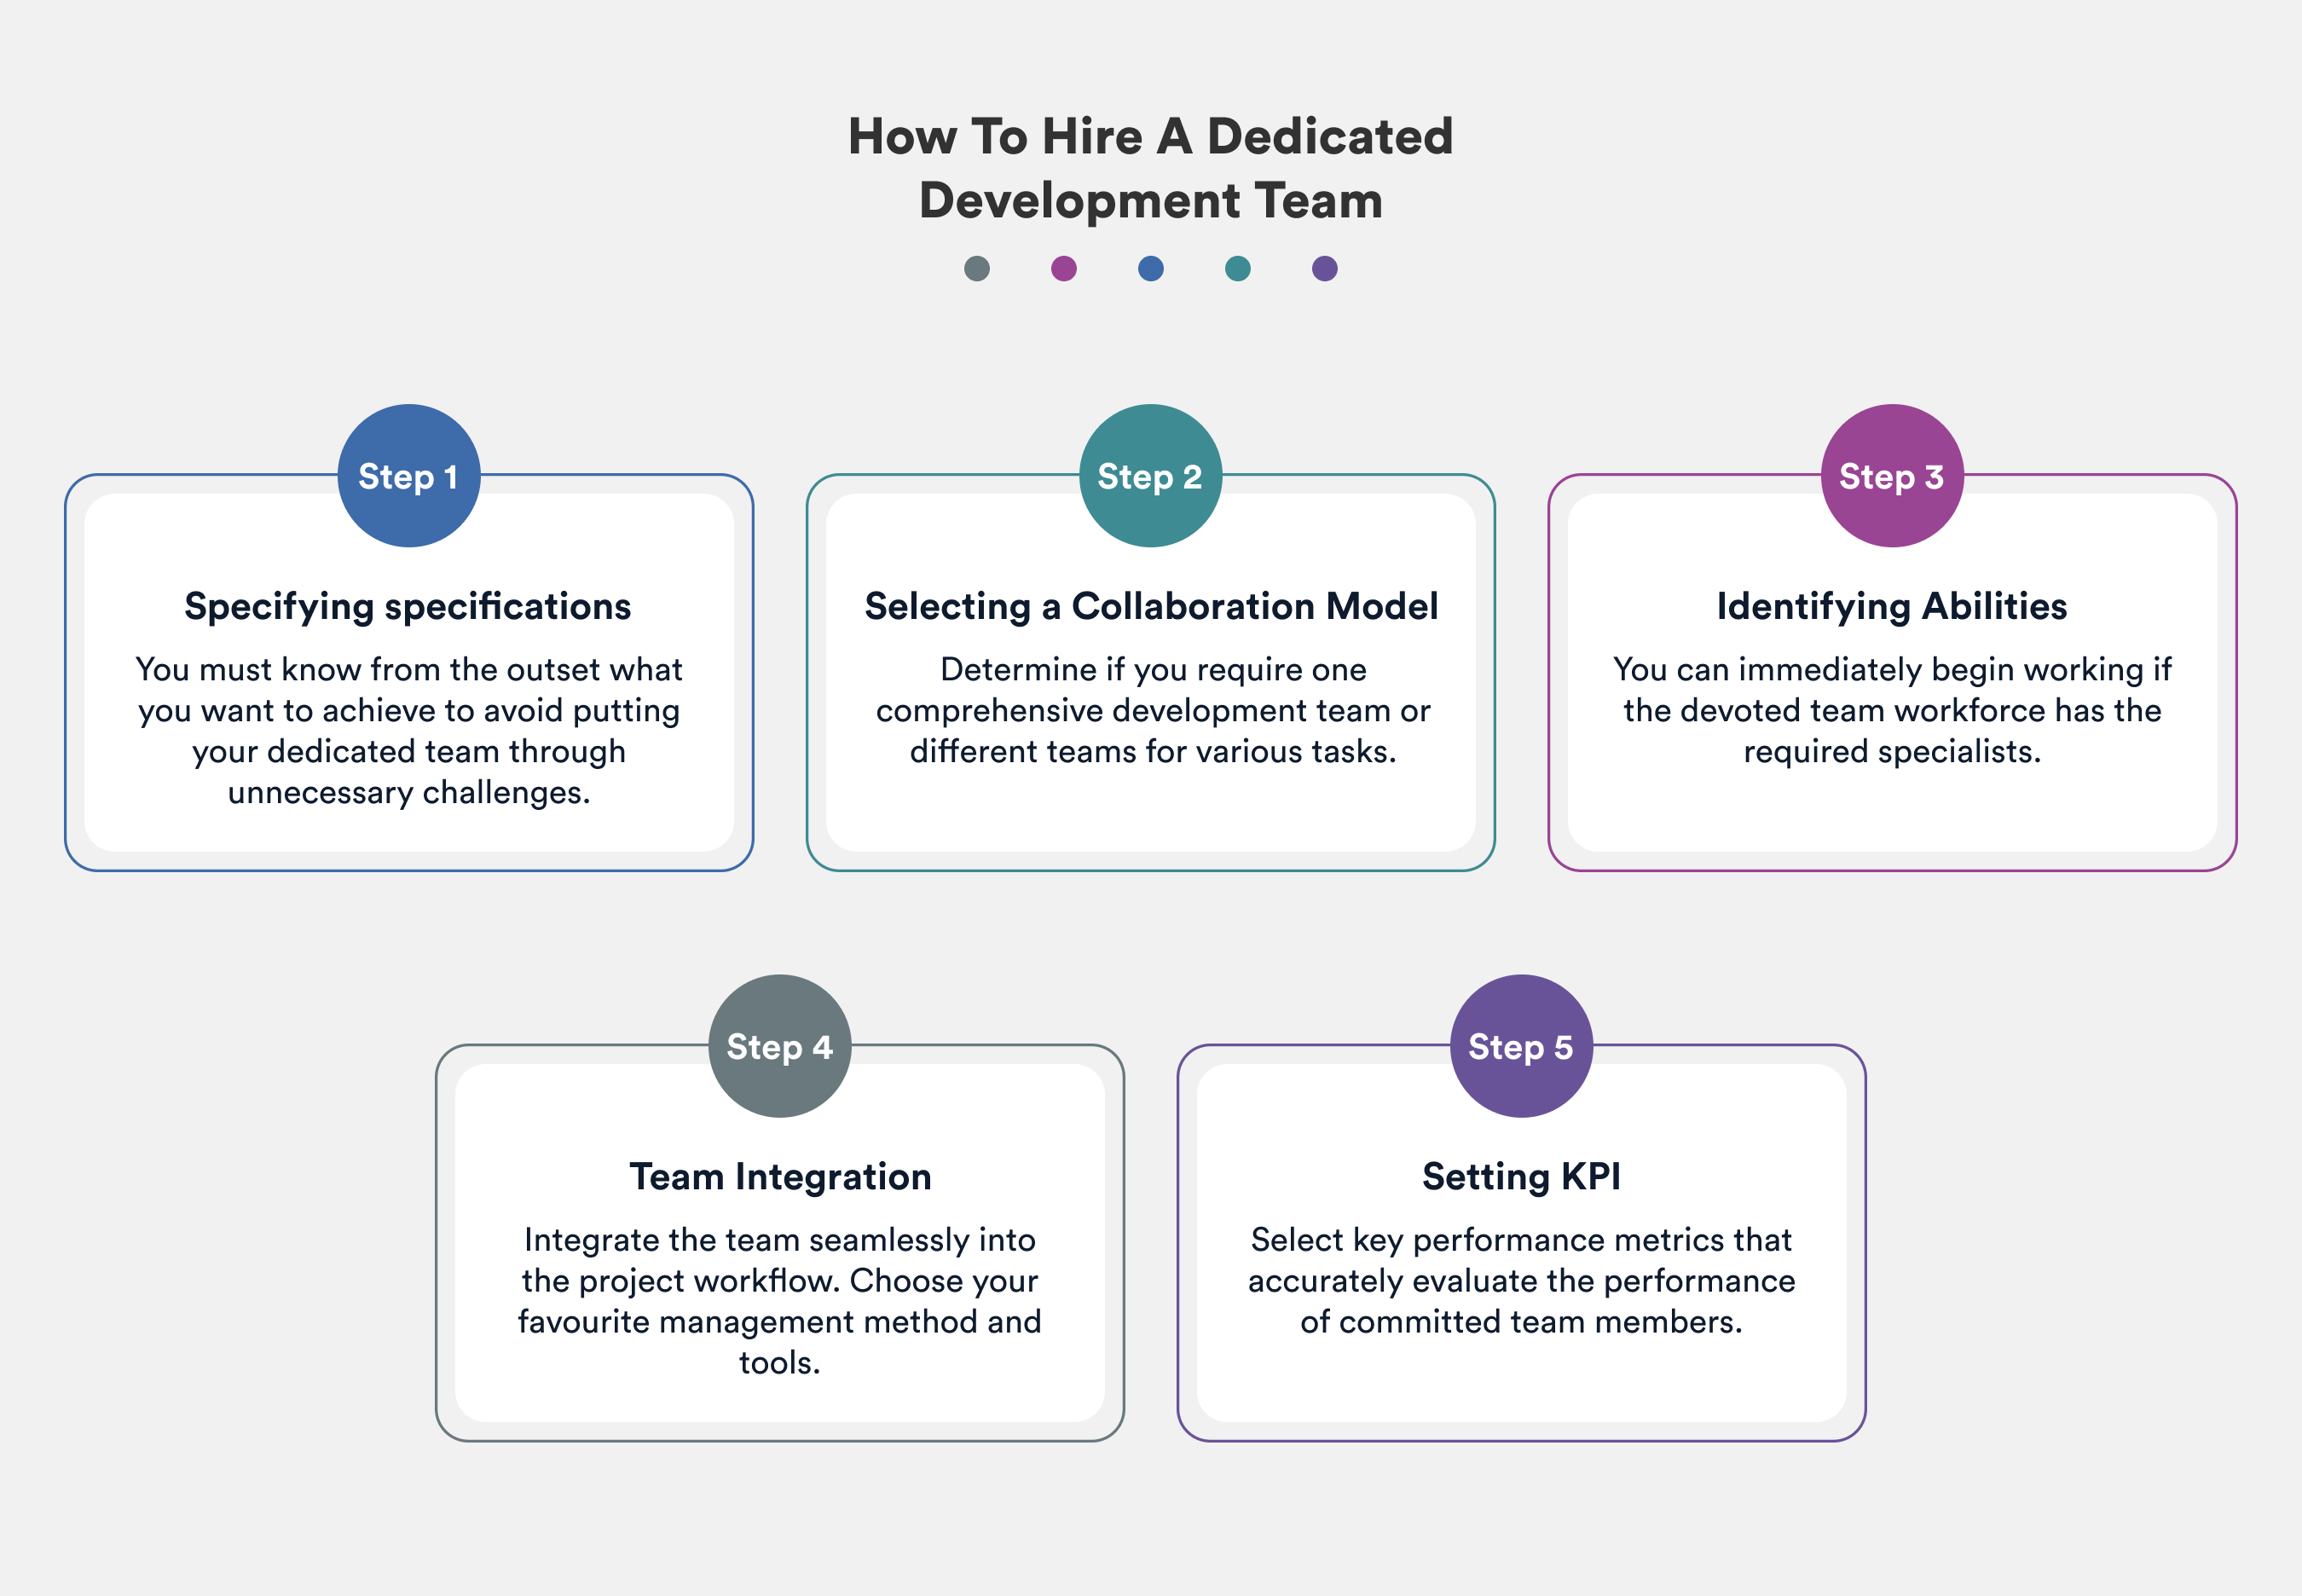 How to hire a dedicated development team